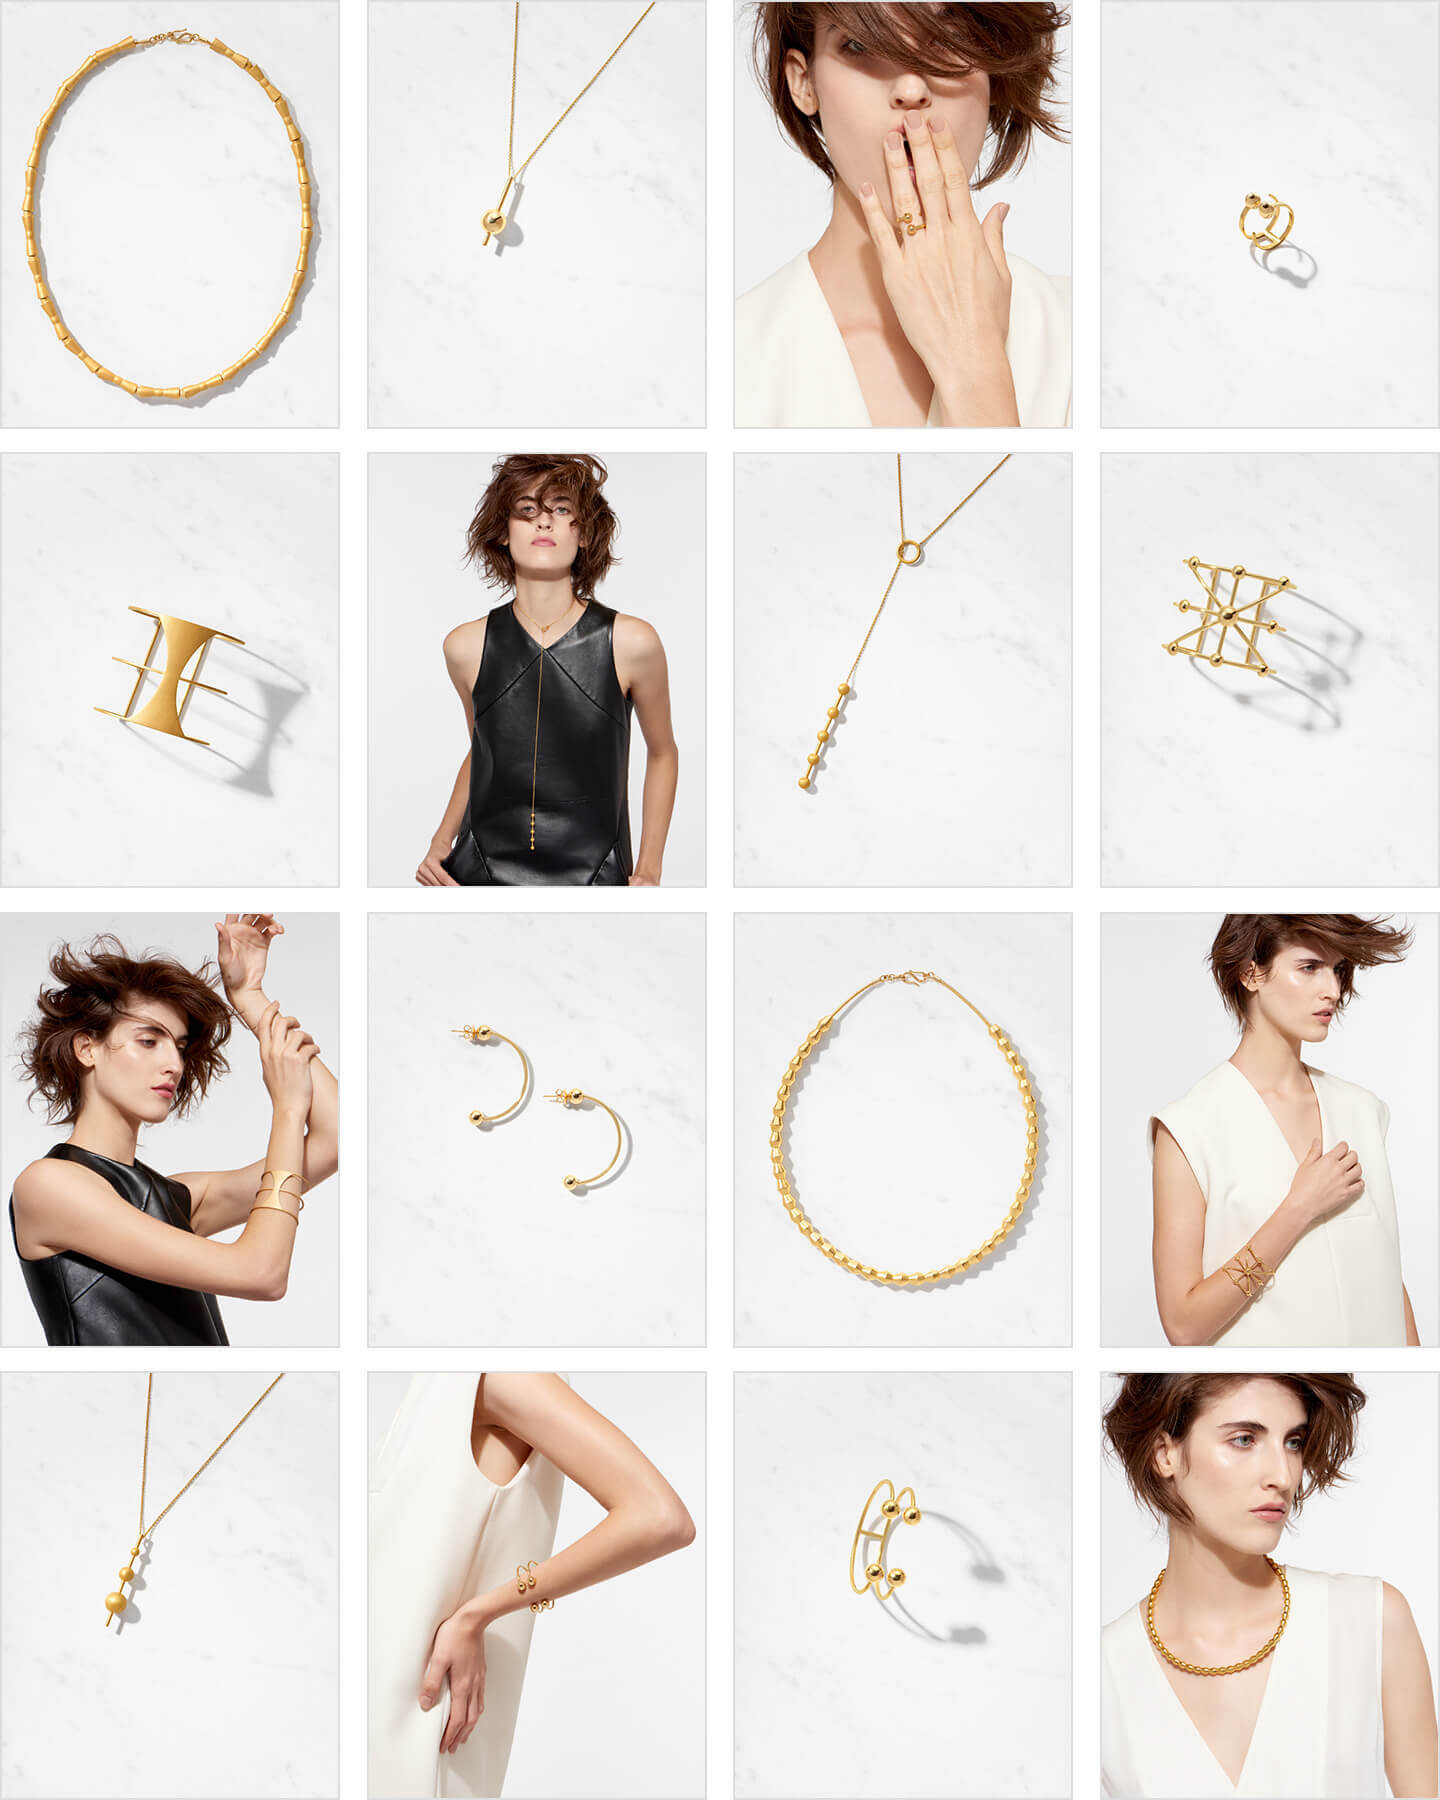 Auvere Cosmic Gold Look Book 22 and 24 karat gold jewelry